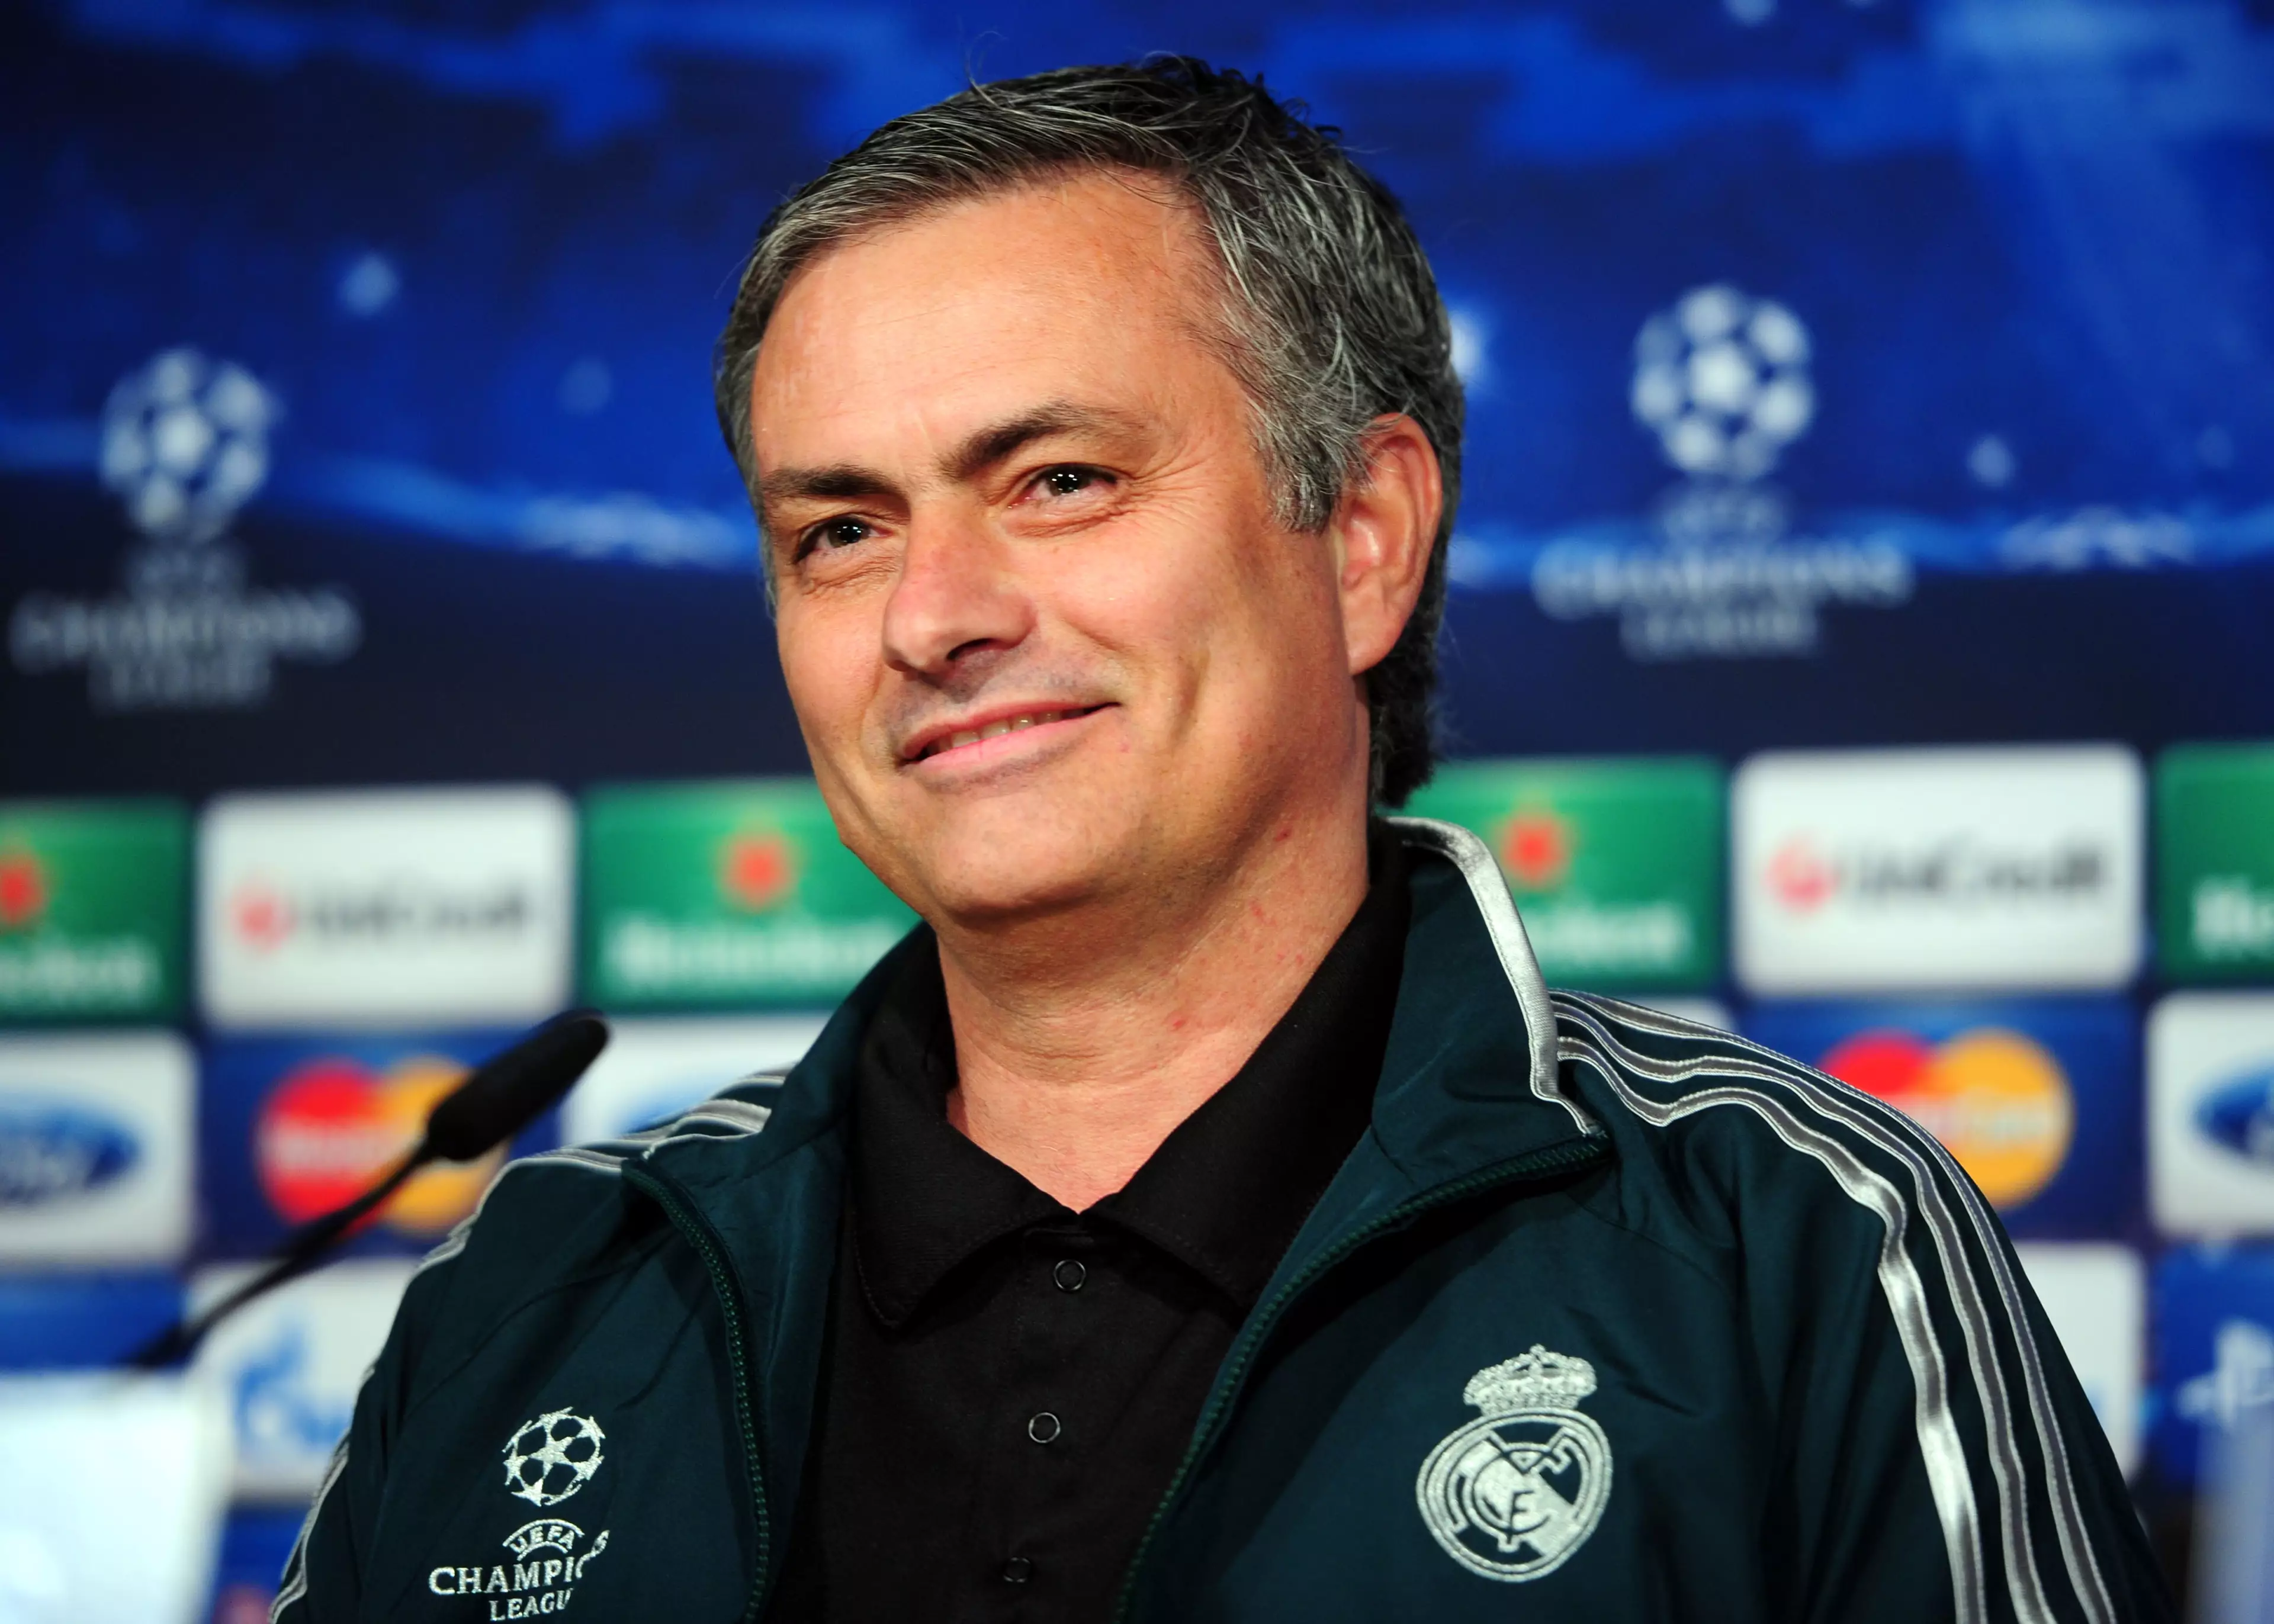 Could Mourinho be back at Real? Image: PA Images